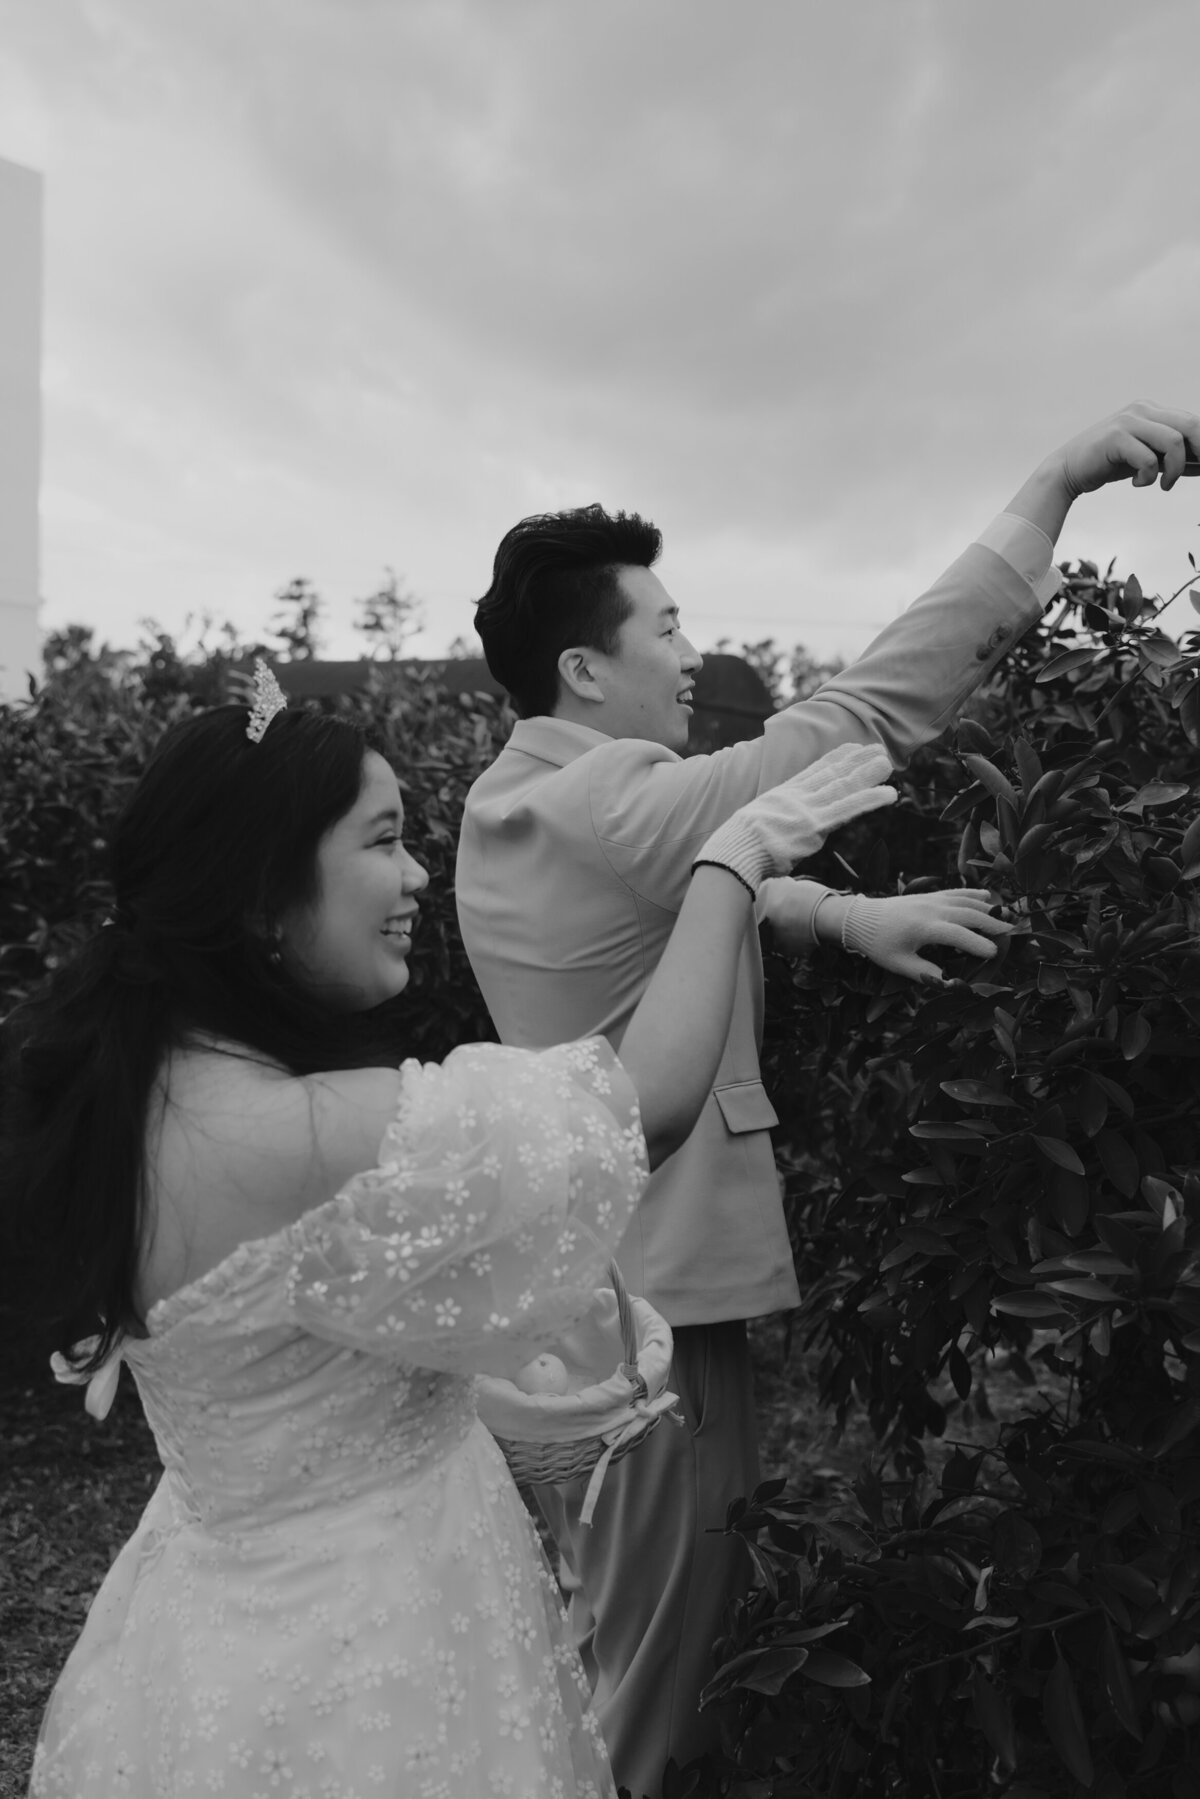 both the groom and bride picking some tangerines